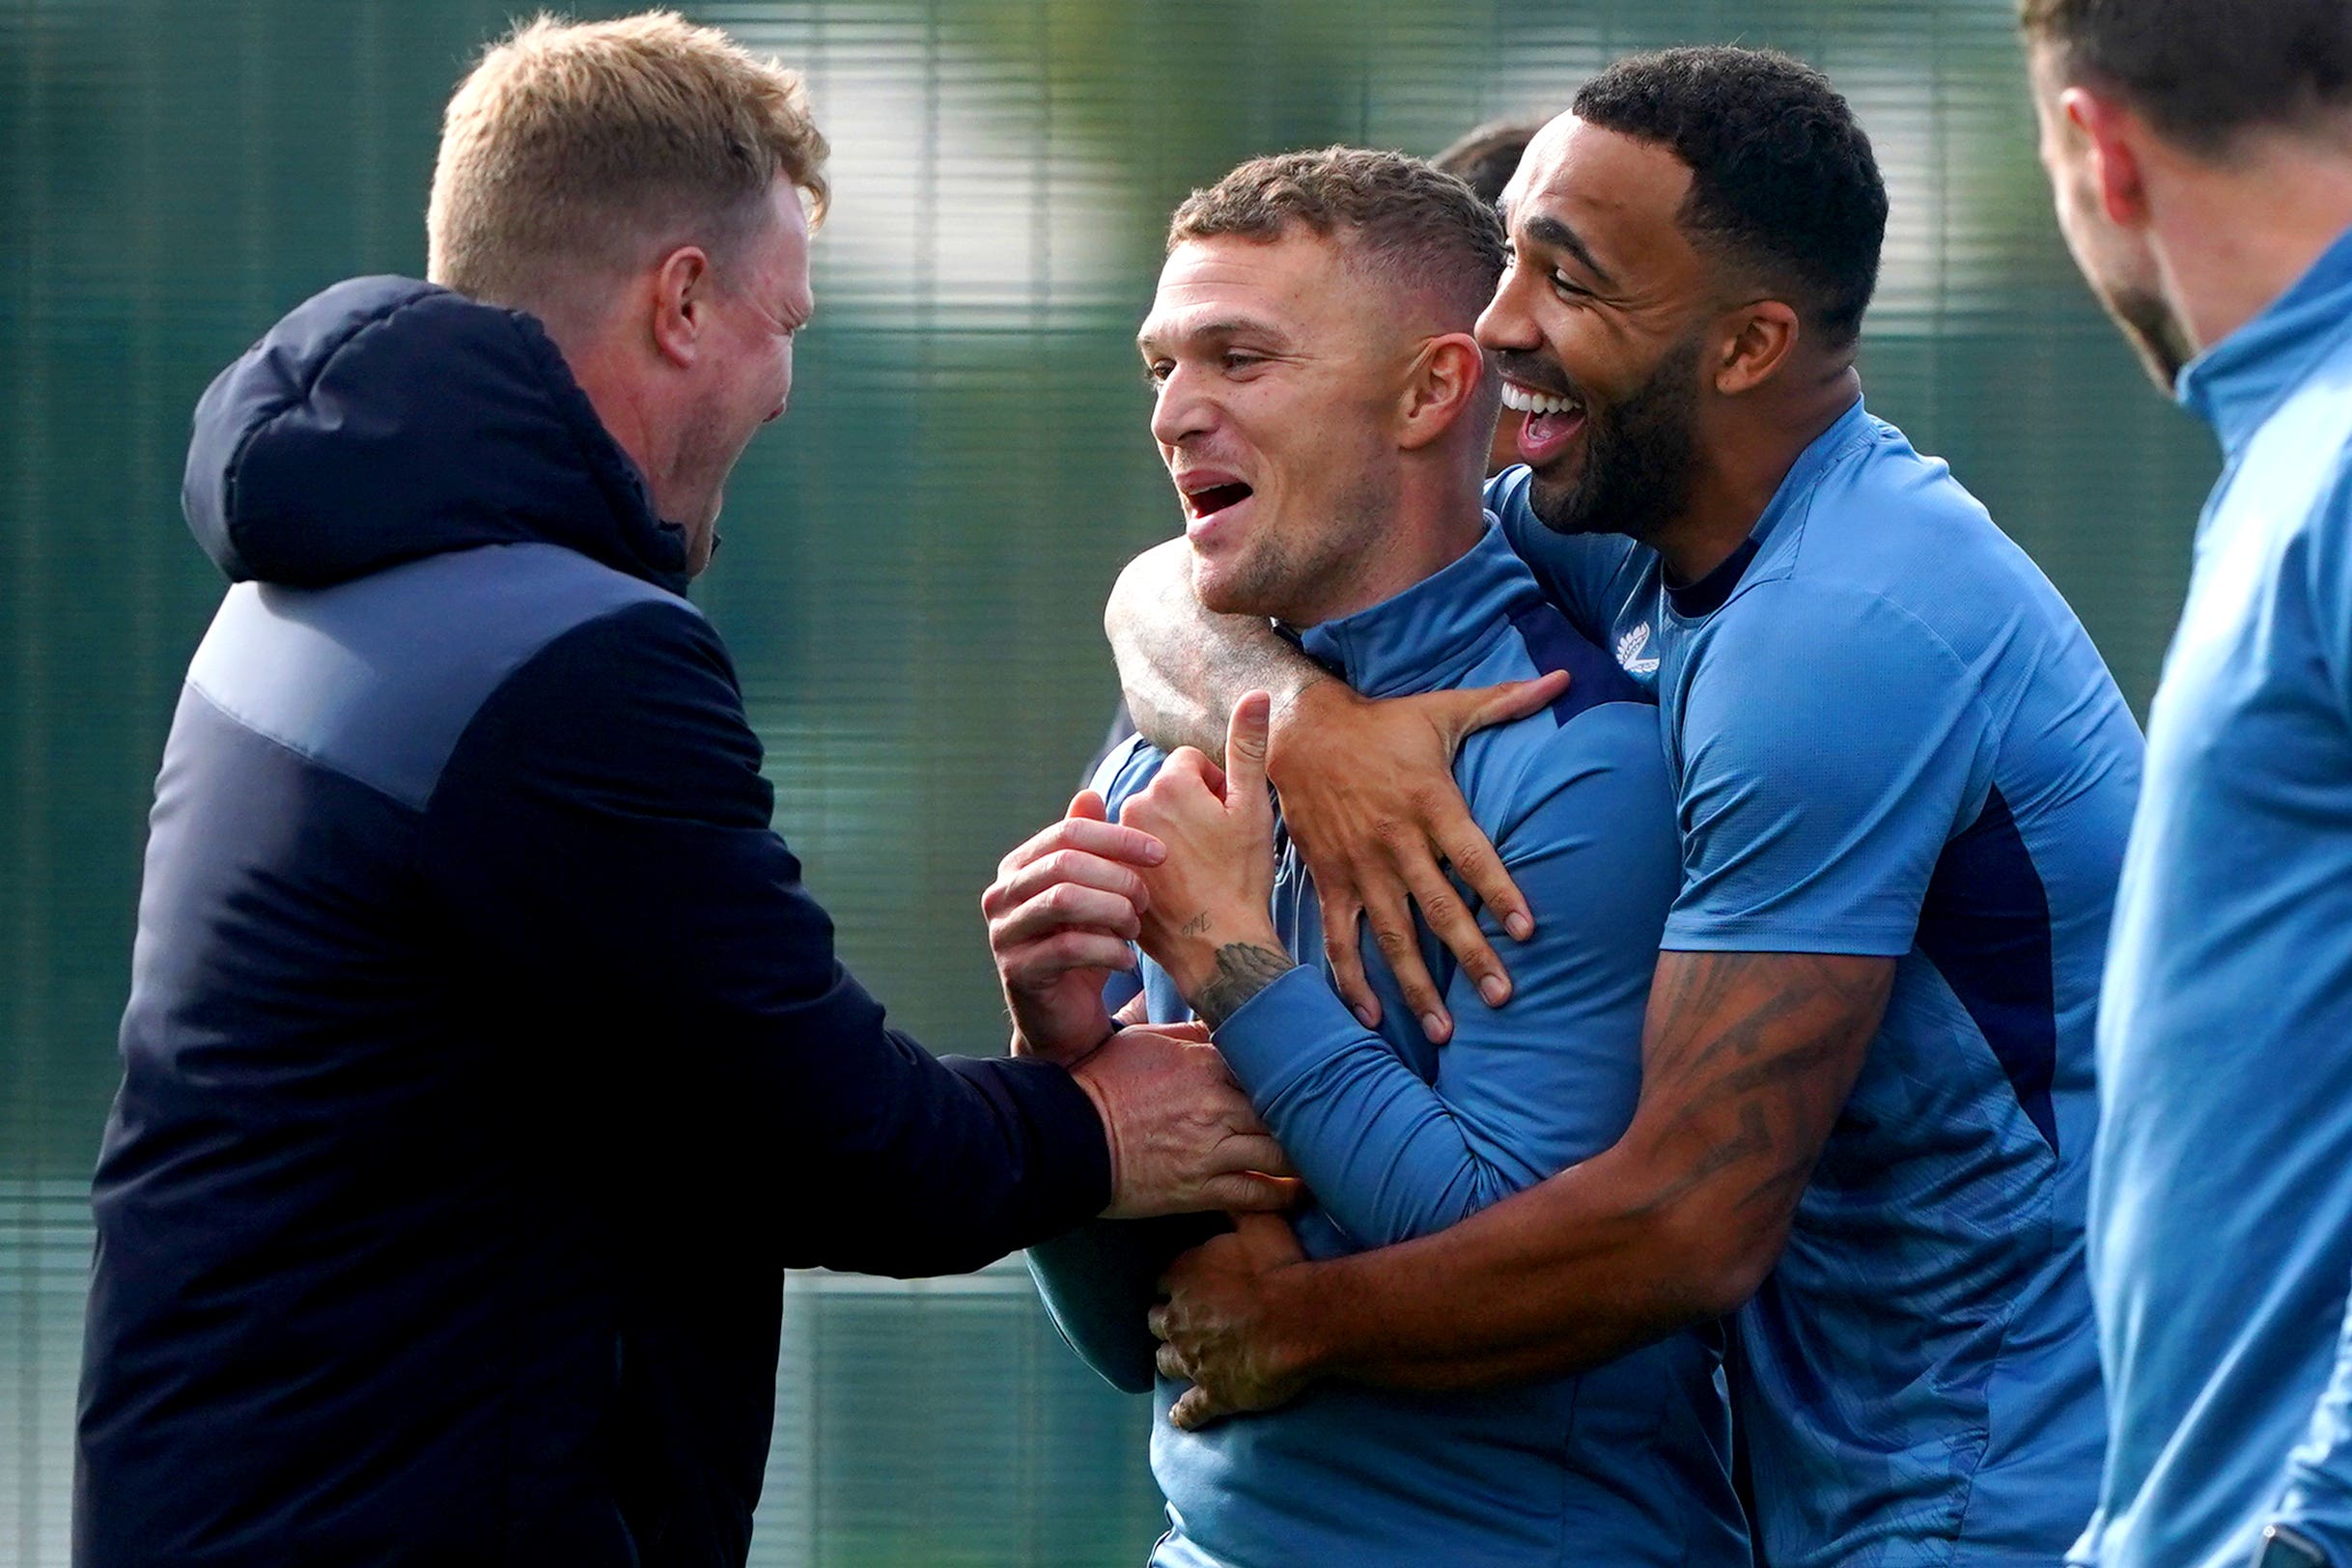 Kieran Trippier, centre, and Callum Wilson, right, are the subjects of transfer speculation